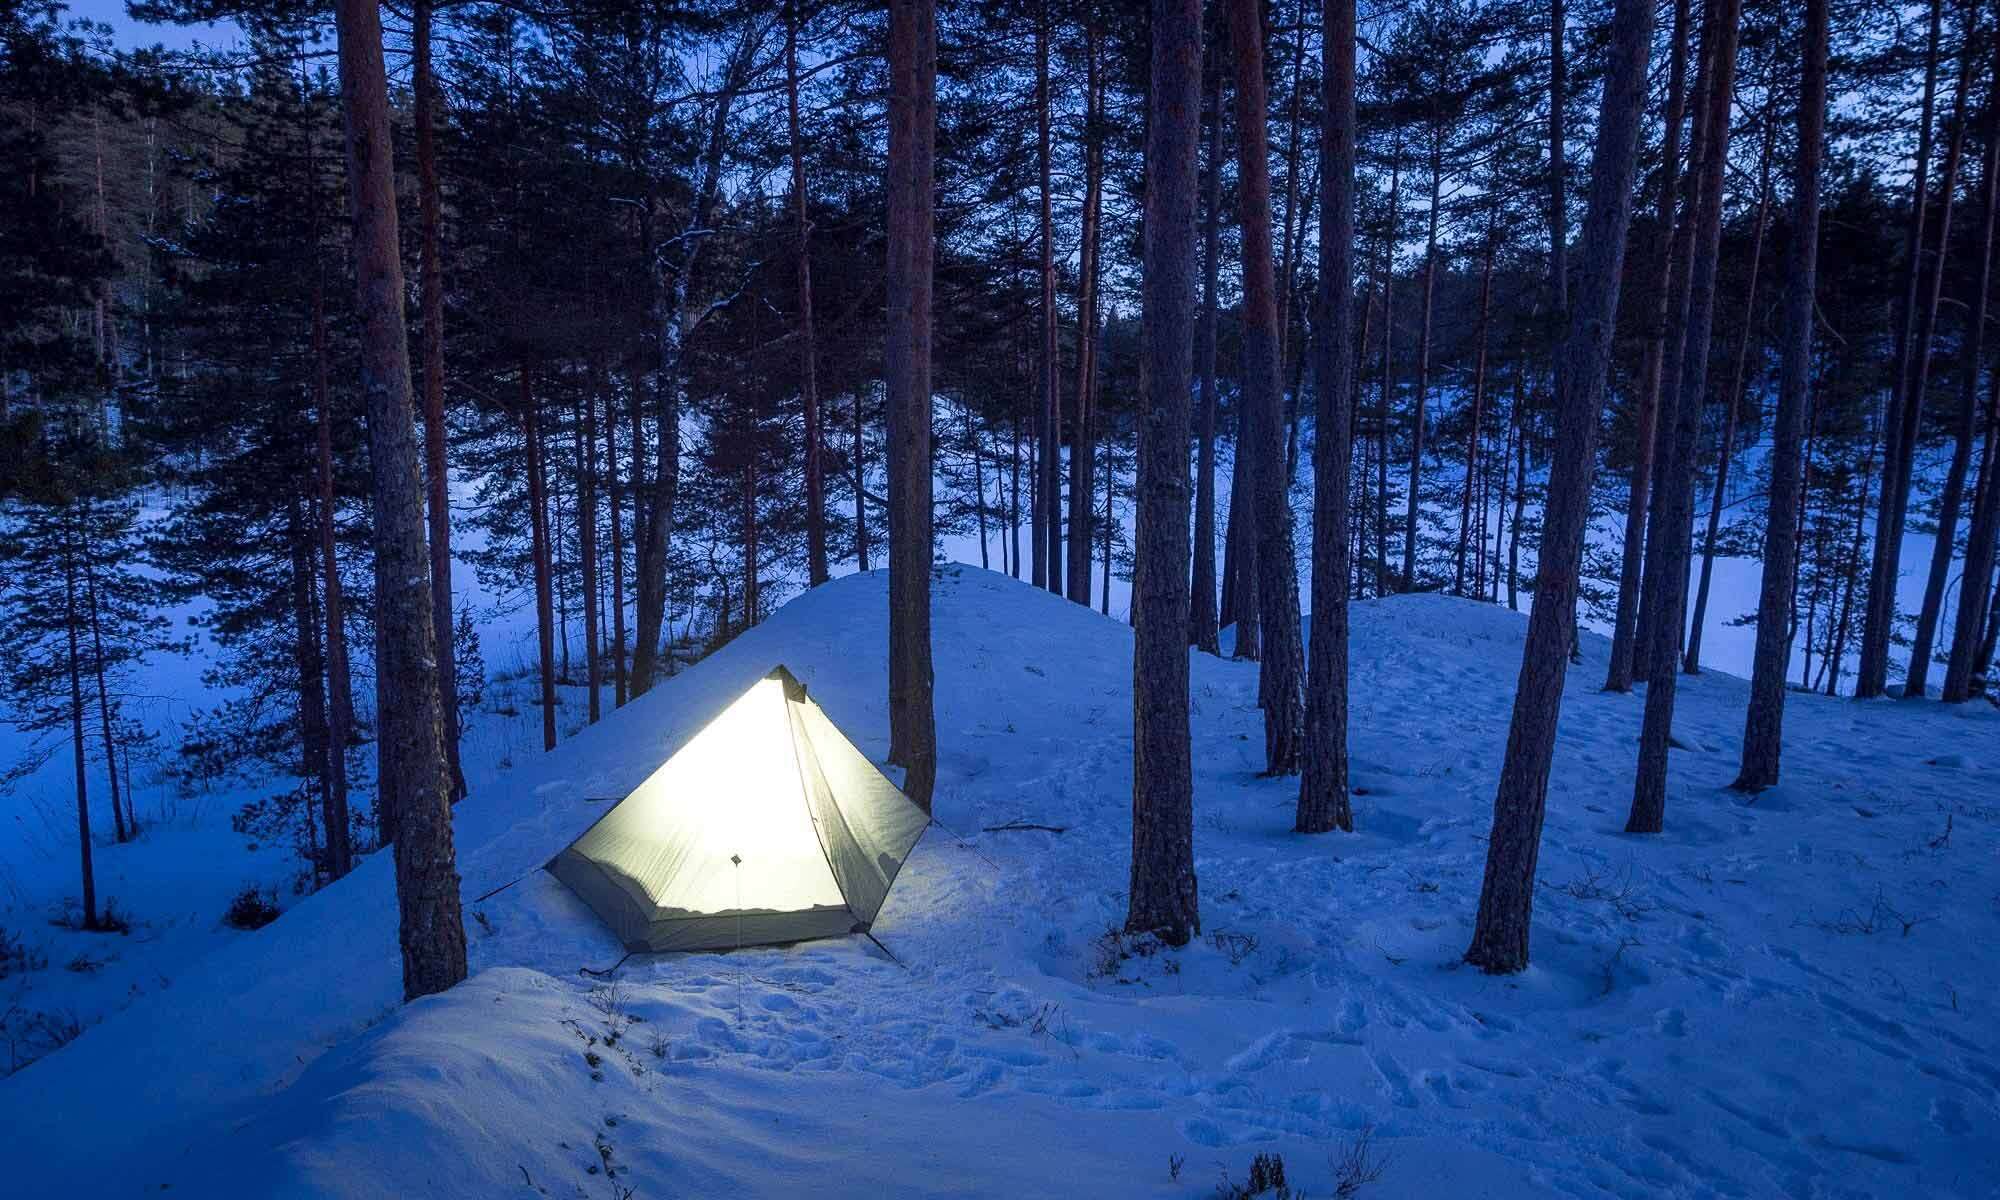 Nuuksio National Park in winter. Hiking and camping with a tent in March. Finnish nature near Helsinki, Finland.